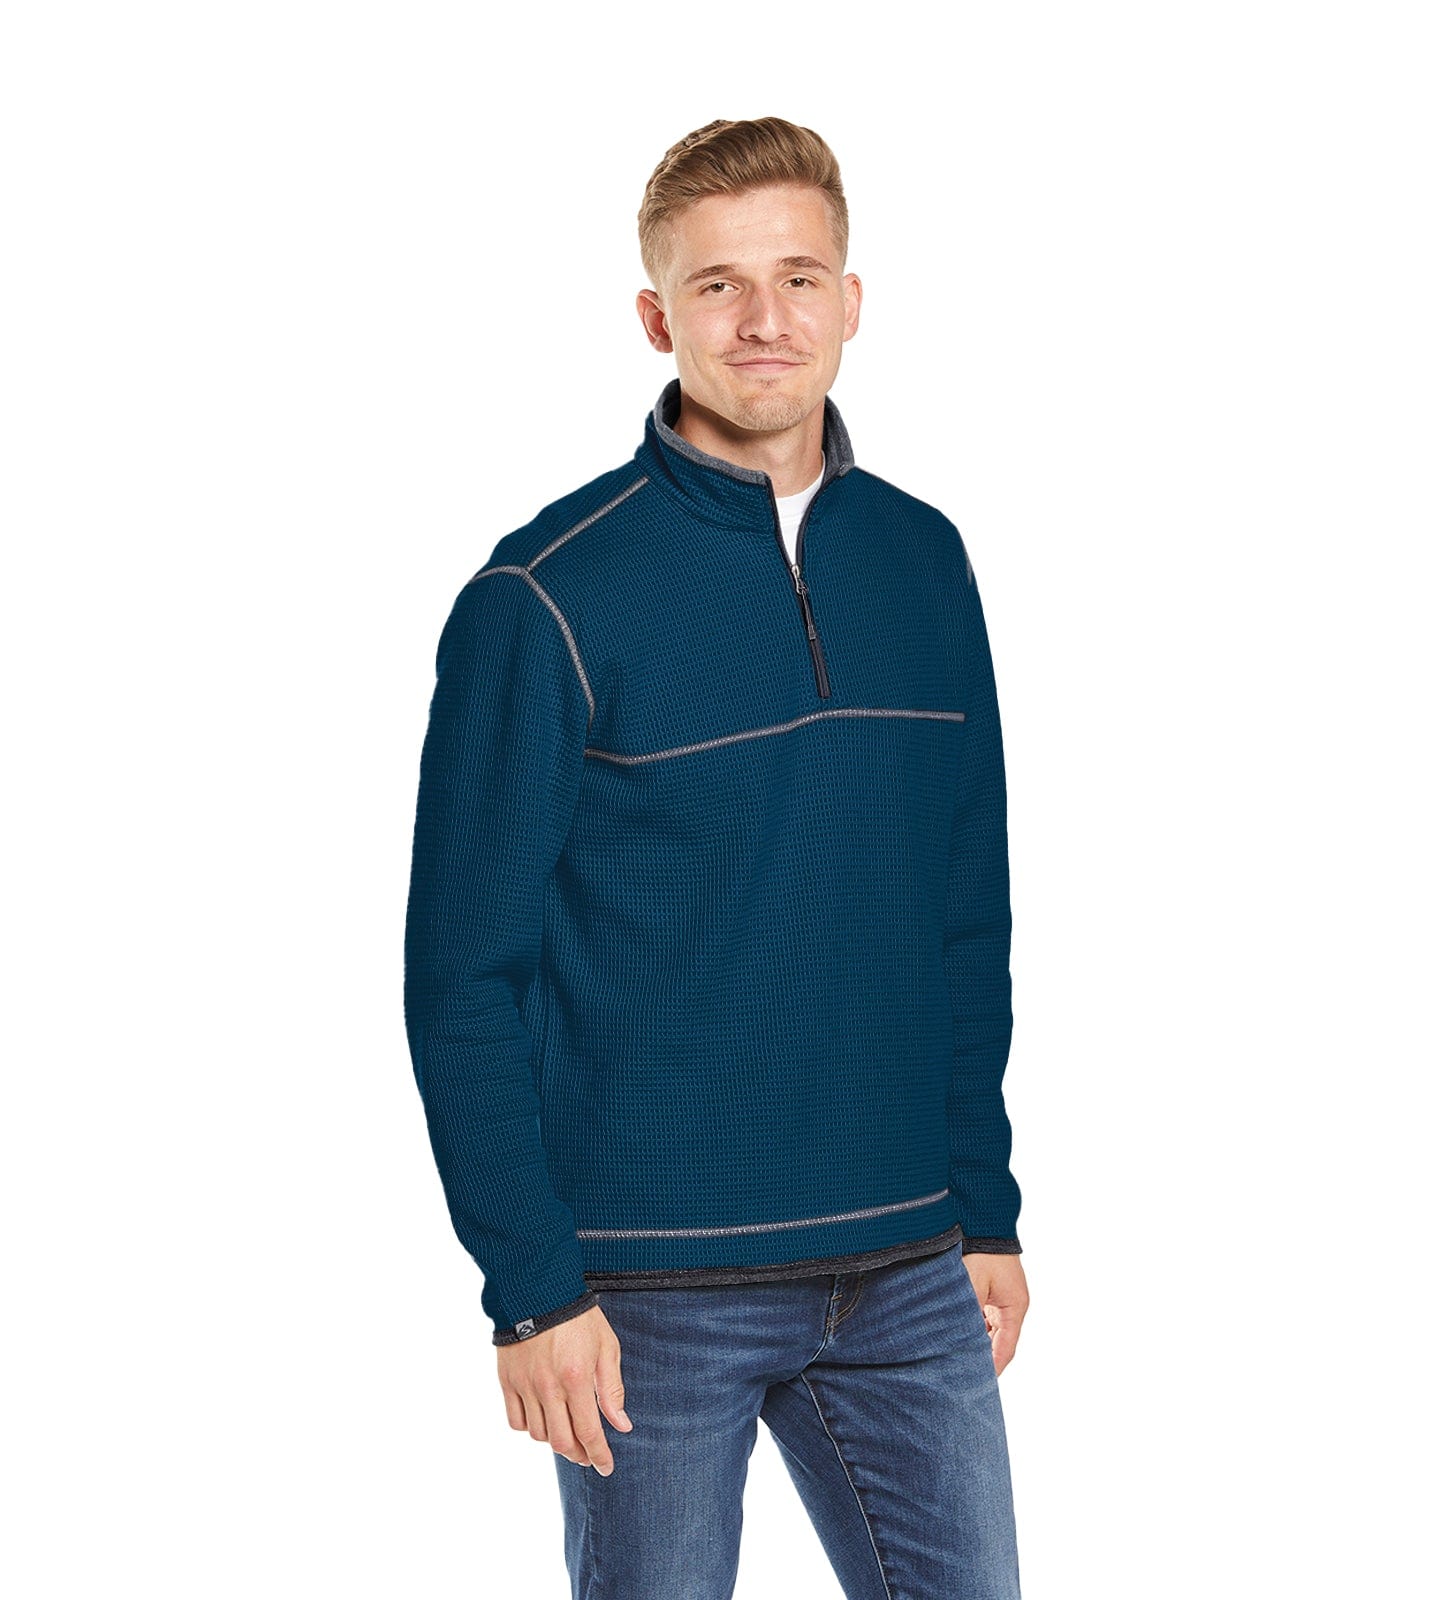 Men's Thermal Sherpa Lined 1/4 Zip Pullover